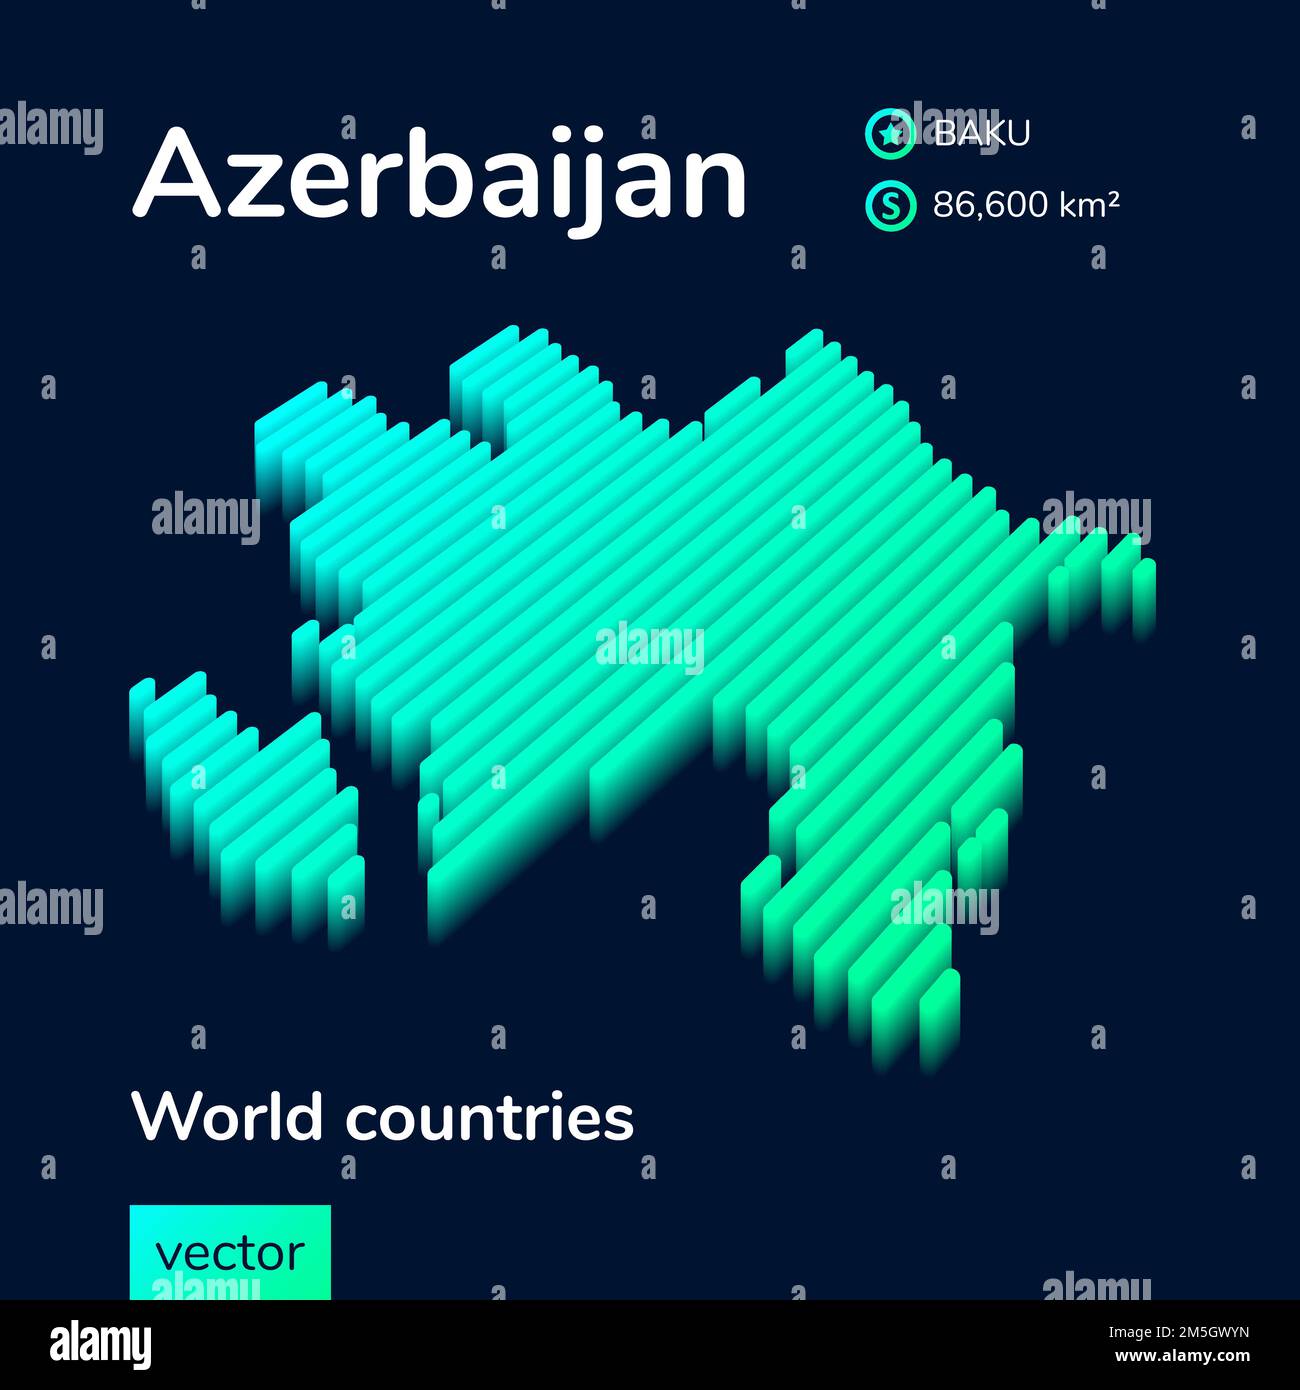 Azerbaijan 3D map. Stylized neon digital isometric striped vector Azerbaijan map is in green and mint colors on the dark blue background Stock Vector